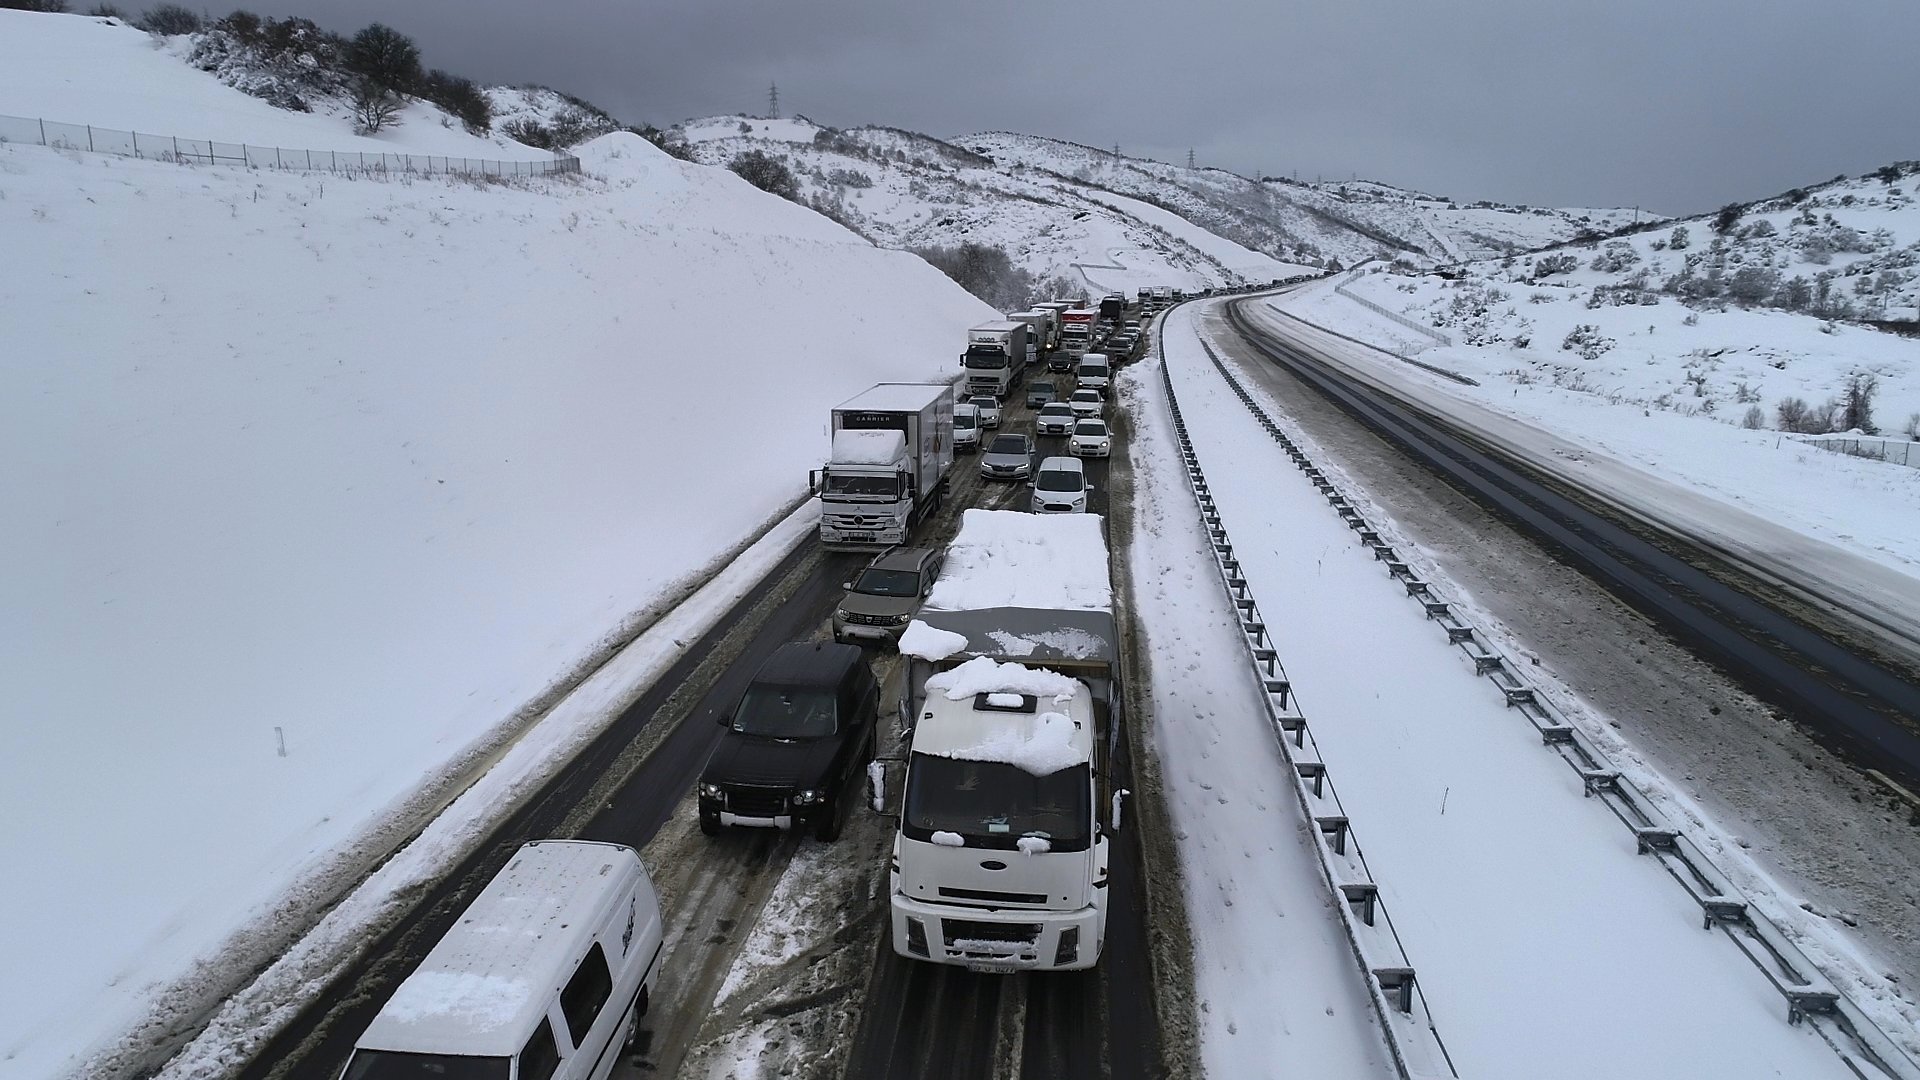 snowfall shuts down roads causes accidents across turkey daily sabah